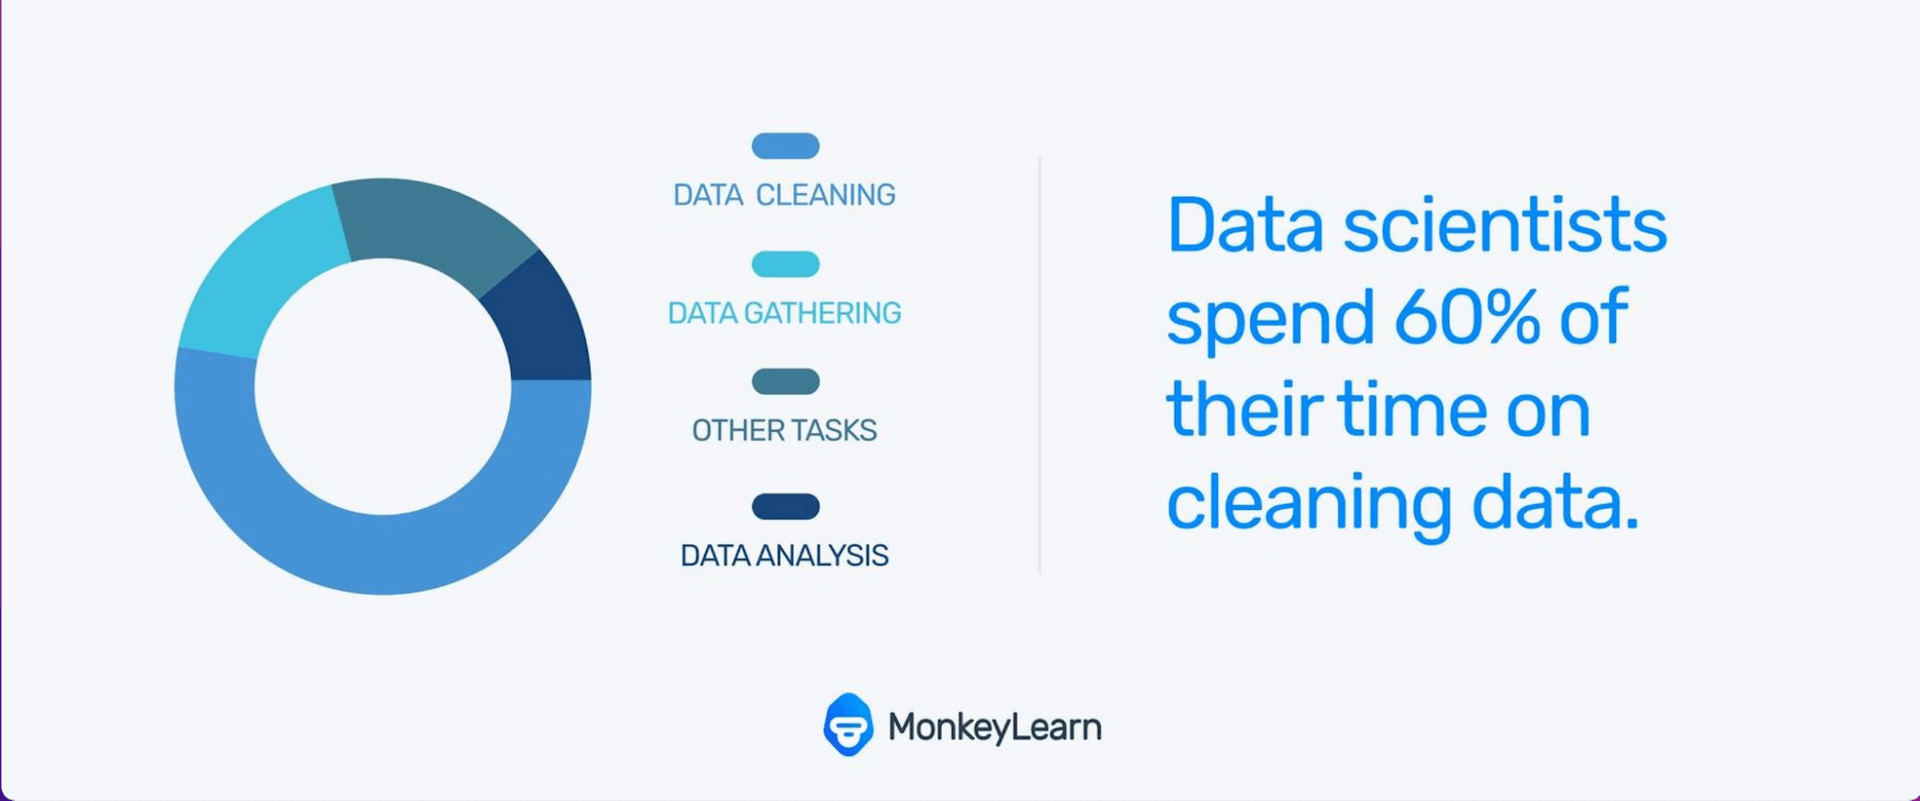 Pie chart showing the amount of time data scientists spend on data cleaning (60%), data gathering, data analysis, and other tasks.